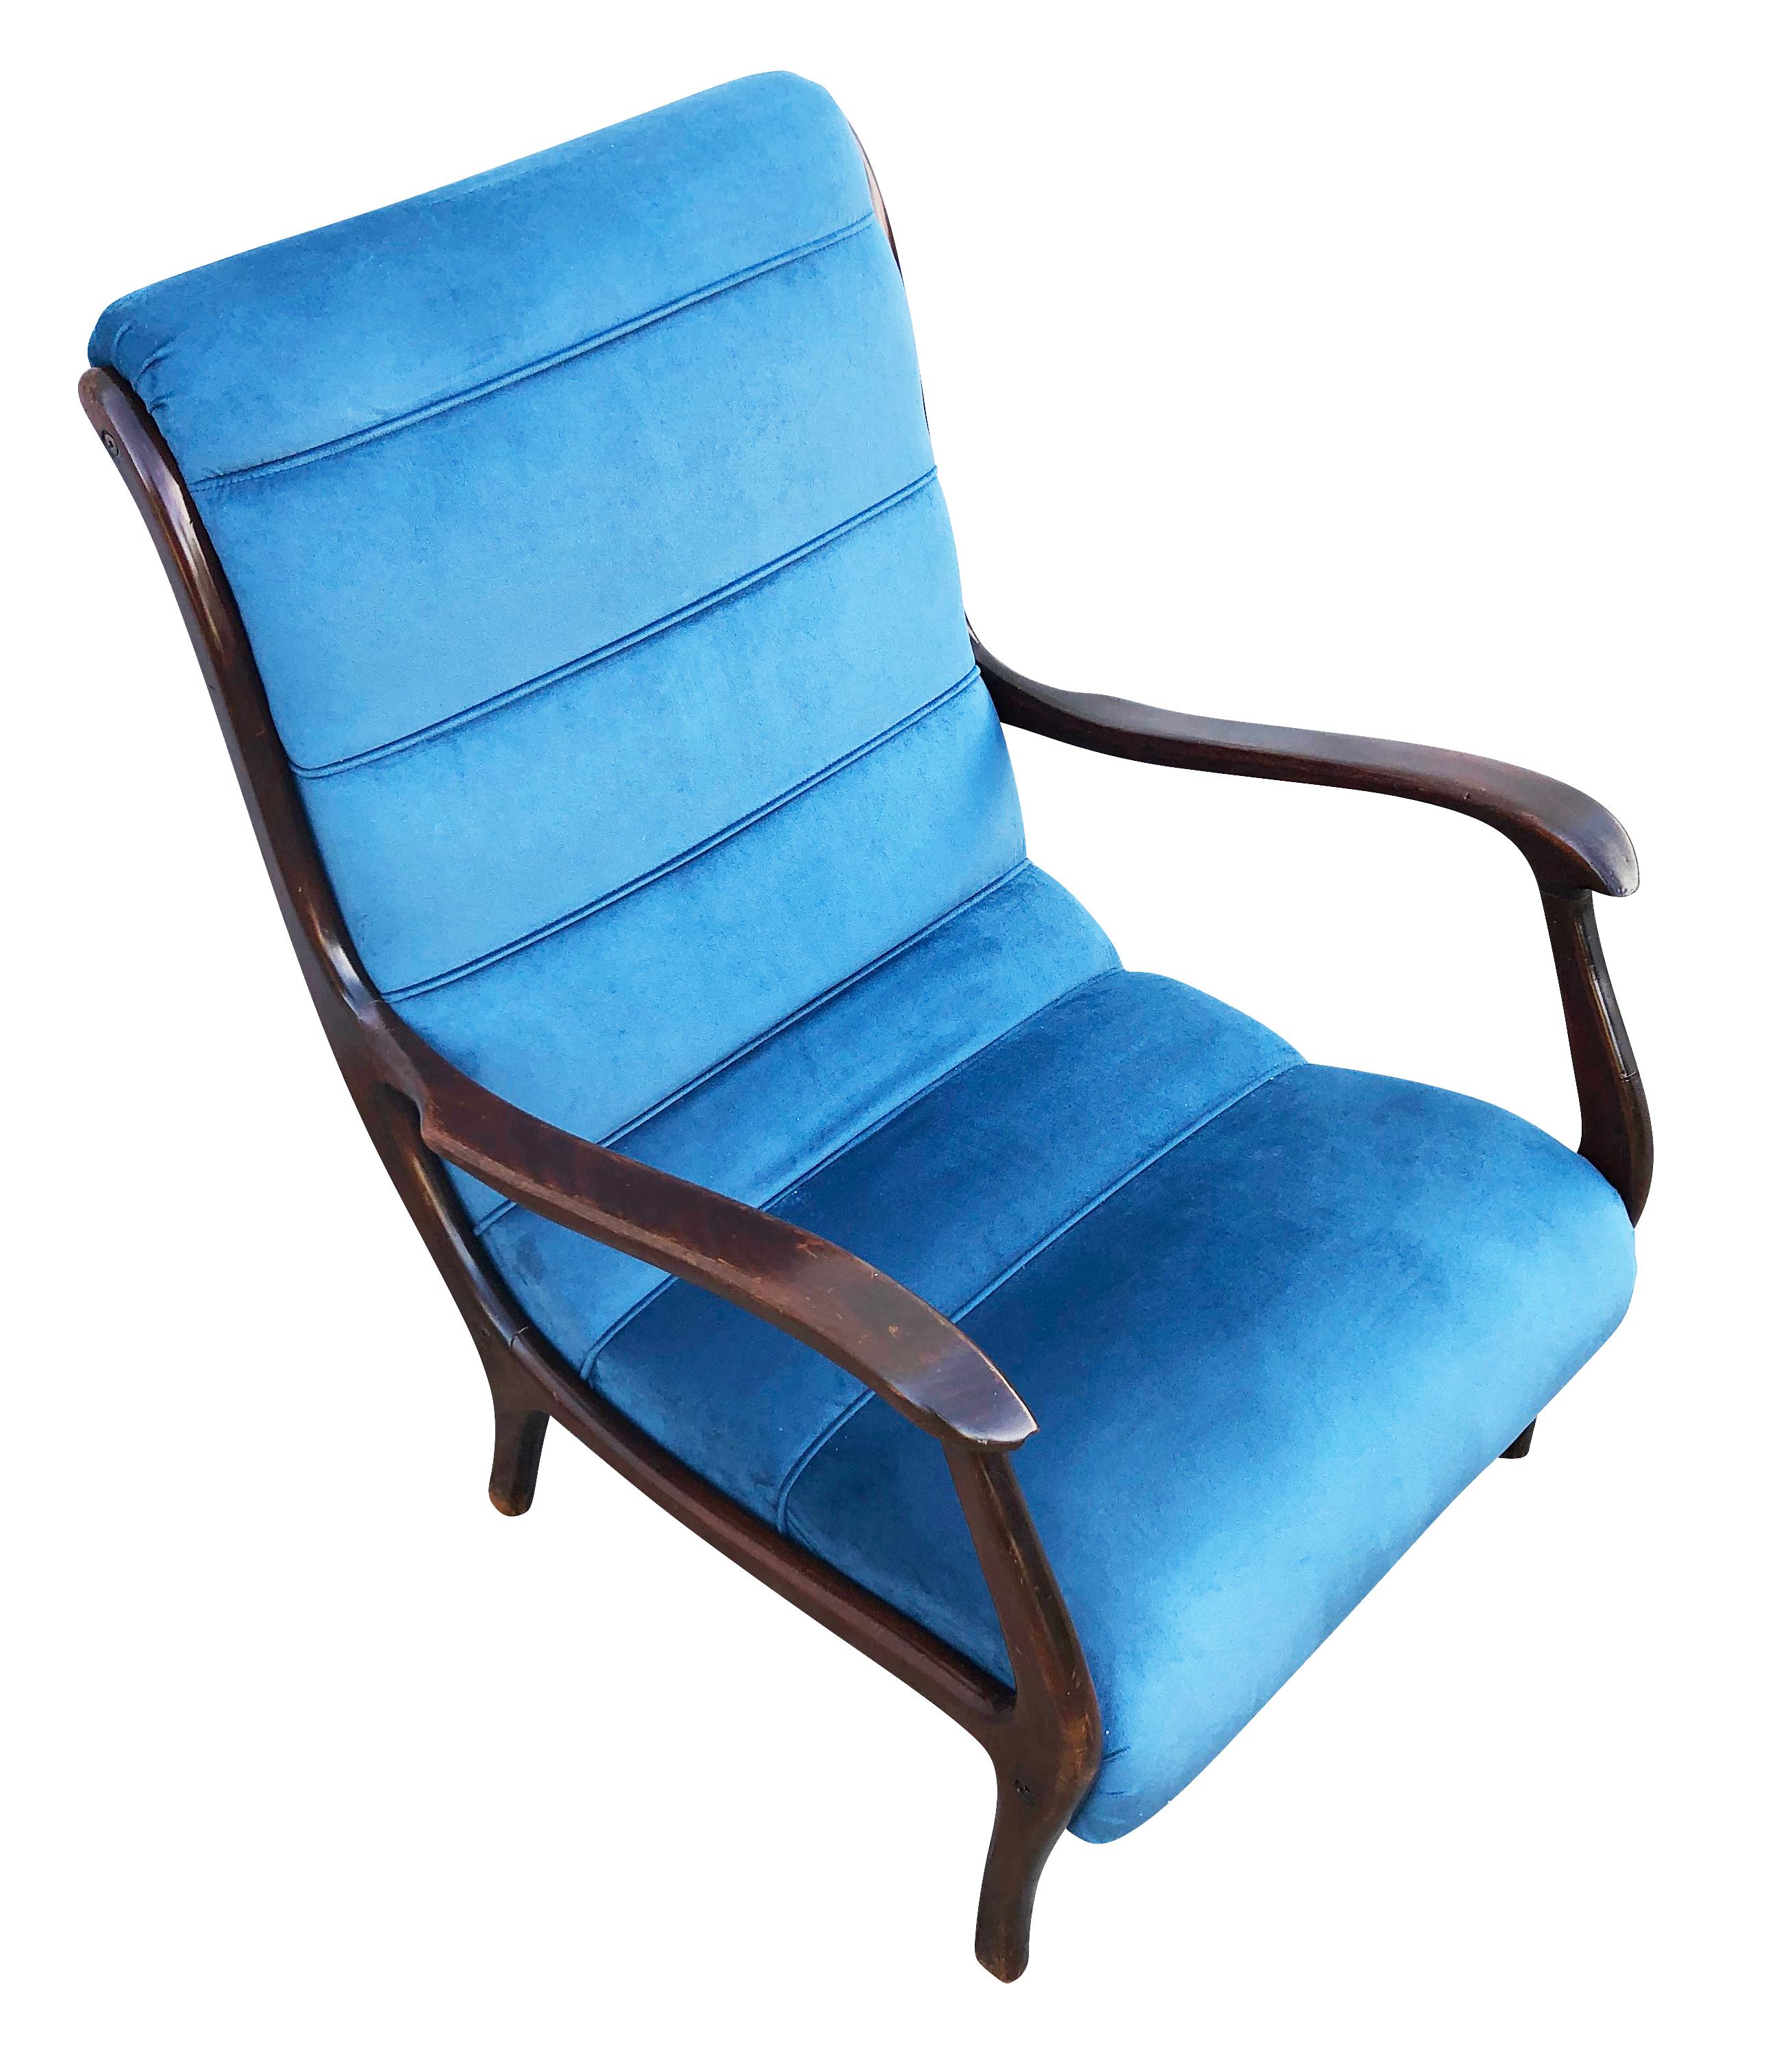 Pair of Italian midcentury lounge chairs by Ezio longhi with wood framing and blue velvet seats. Price listed is for the pair-Can be split upon request. 

Condition: Minor wear consistent with age and use. Recently recovered.

Measures: Width